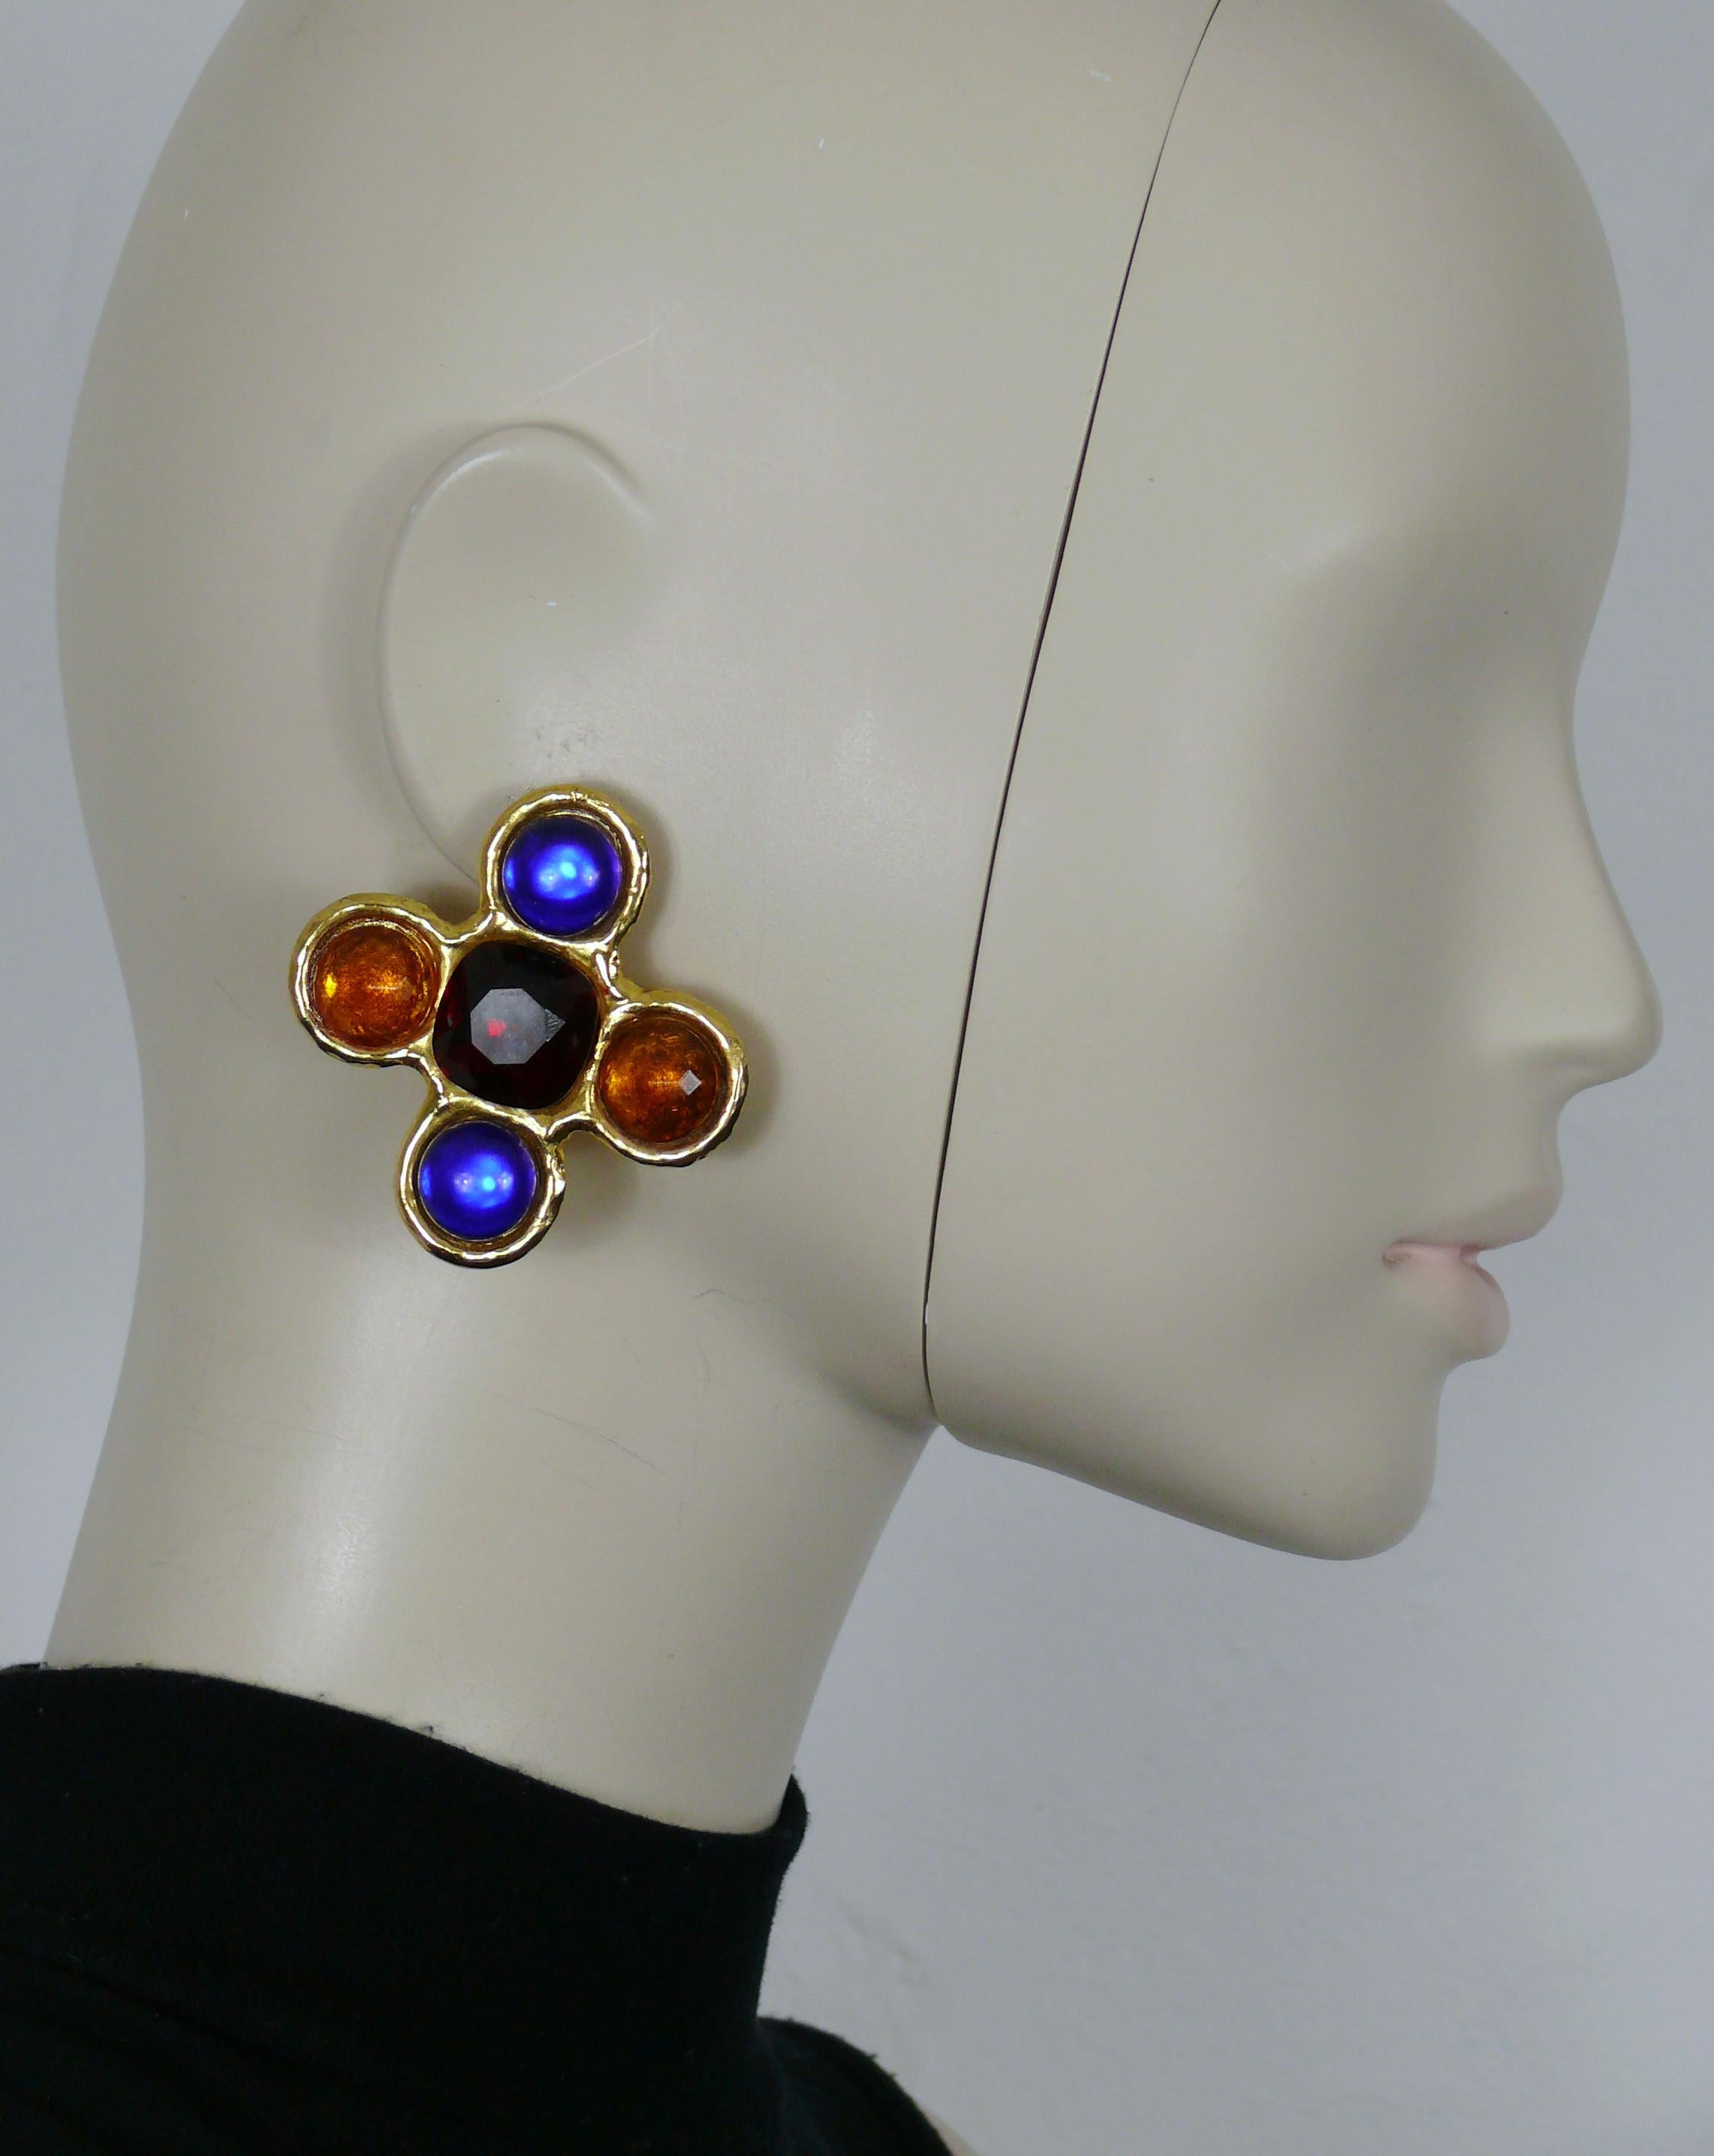 YVES SAINT LAURENT Rive Gauche vintage massive gold tone cross shape clip-on earrings embellished with blue glass cabochons, orange and red crystals.

Embossed YVES SAINT LAURENT Rive Gauche.
Made in France.

Indicative measurements : width approx.